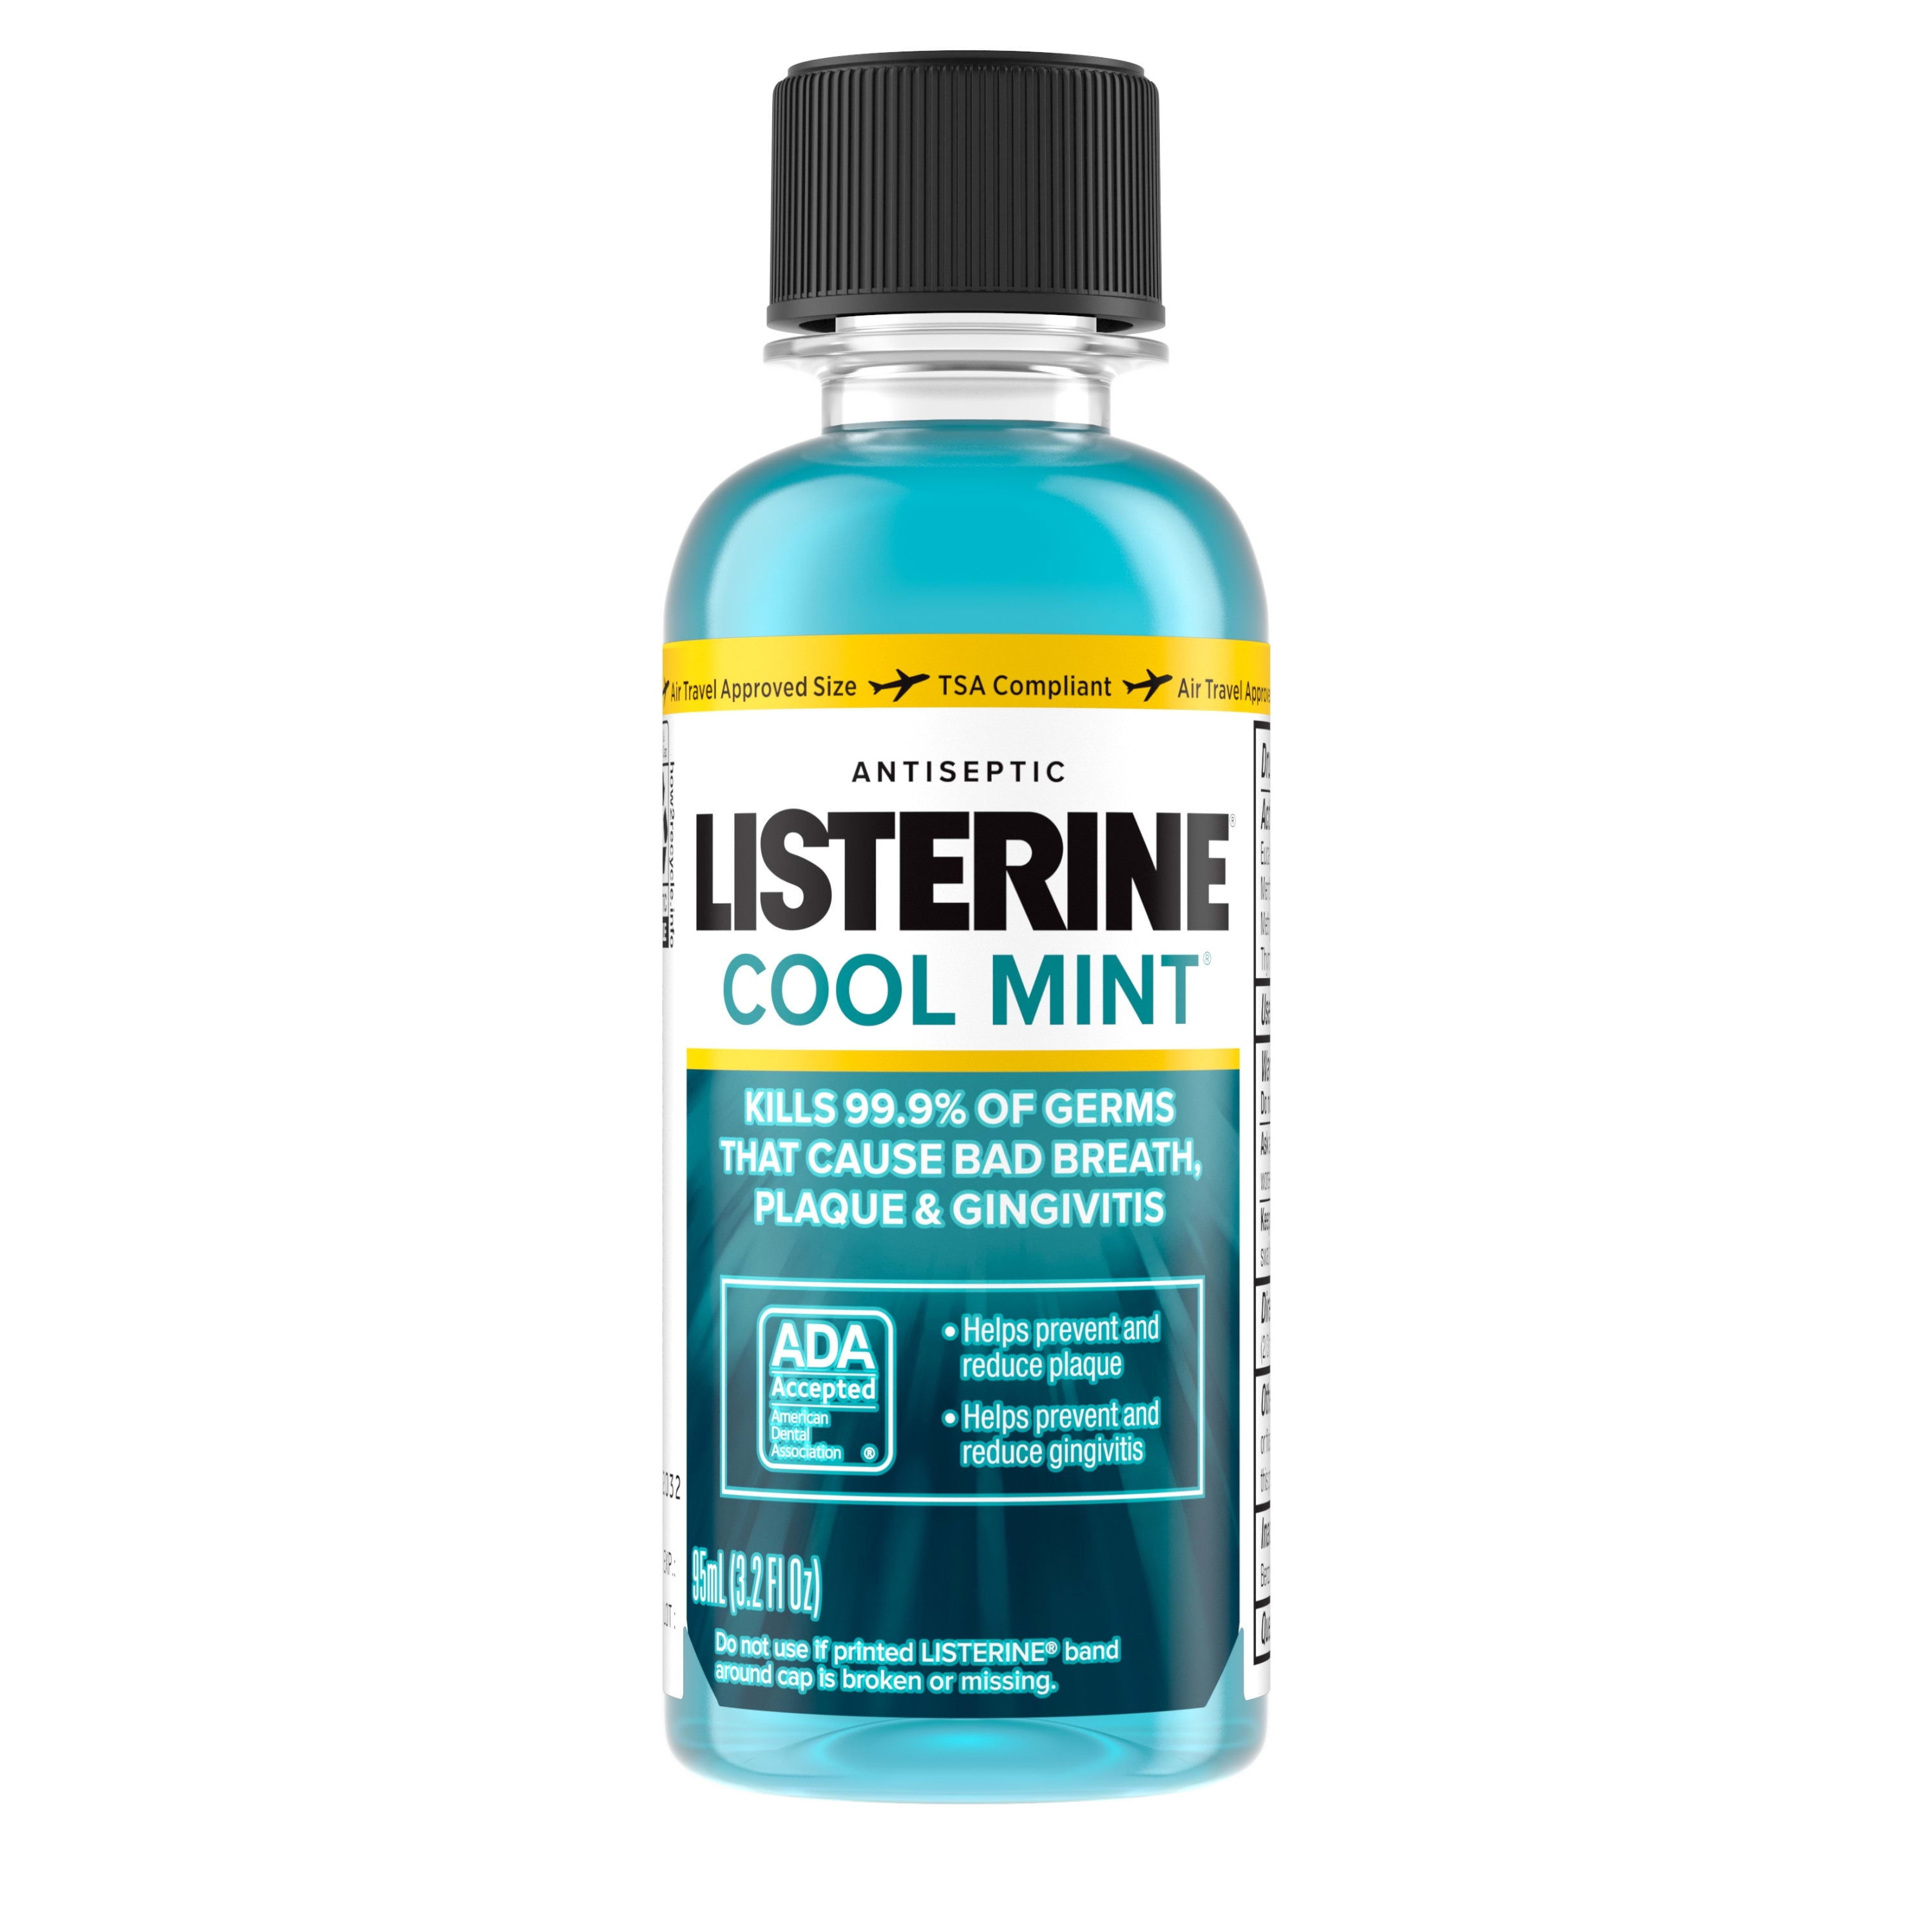 Listerine Cool Mint Antiseptic Mouthwash For Bad Breath 3 2 Oz